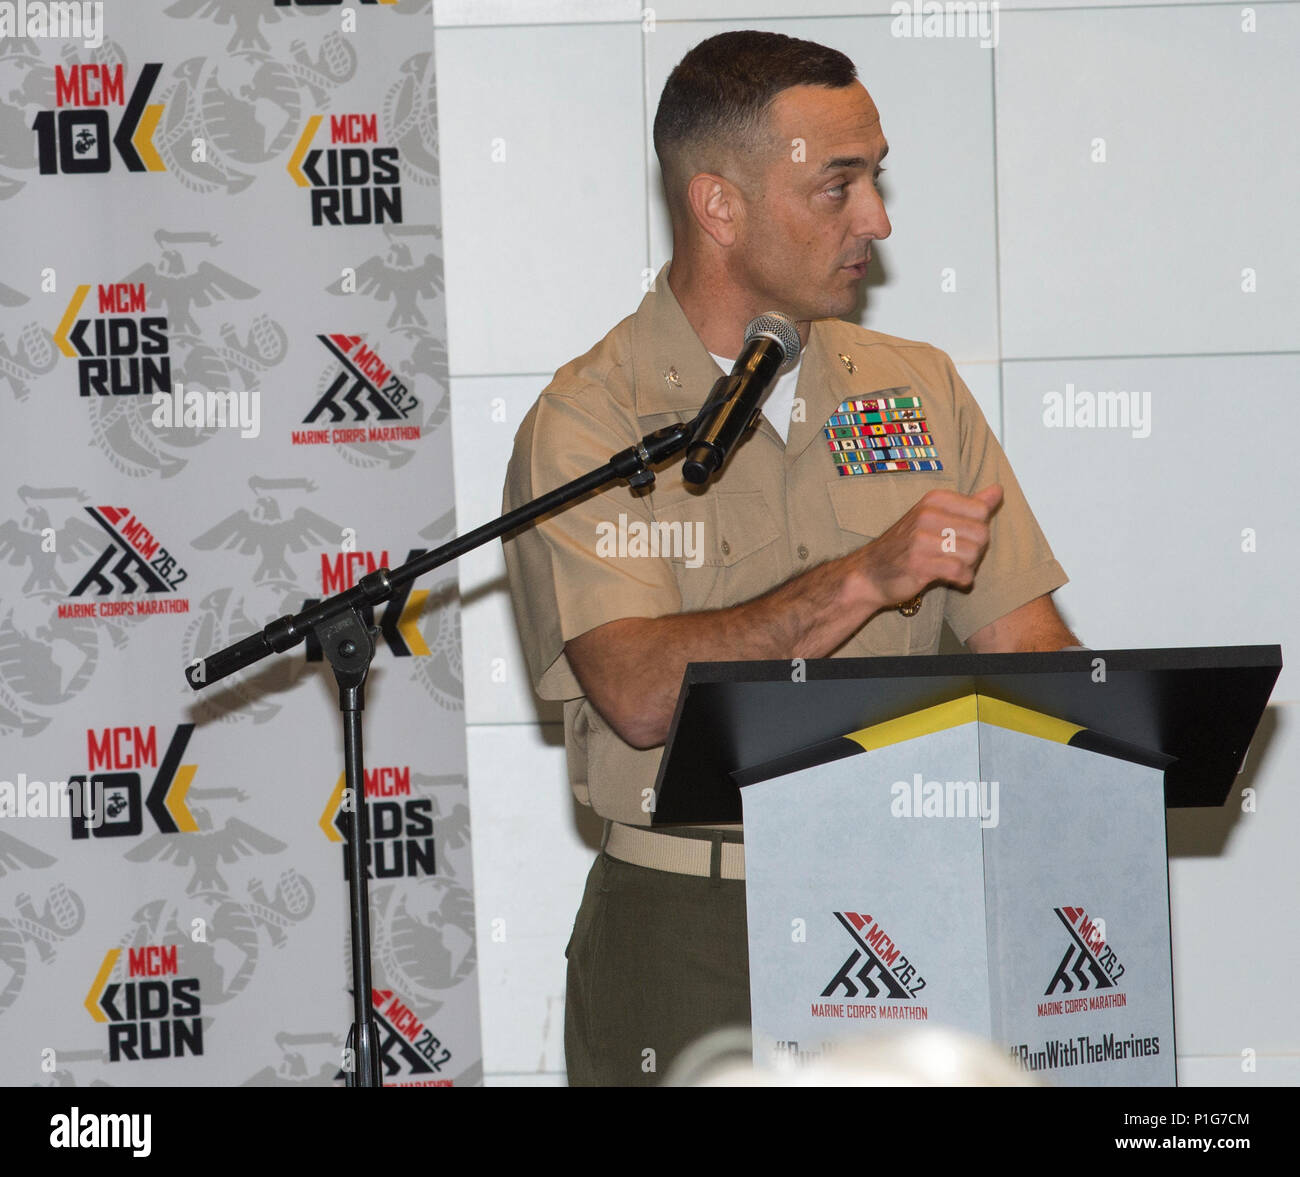 U.S. Marine Corps Col. Joseph Murray, commanding officer of Marine Corps Base Quantico, speaks at the press conferance for the 41st Marine Corps Marathon at the Wolfgang Puck Catering and Events Center at National Harbor, Md., Oct. 28, 2016. Also known as 'The People's Marathon,' the 26.2 mile race drew roughly 30,000 participants to promote physical fitness, generate goodwill in the community, and showcase the organizational skills of the Marine Corps. (U.S. Marine Corps photo by Cpl. Alexander S. Norred) Stock Photo